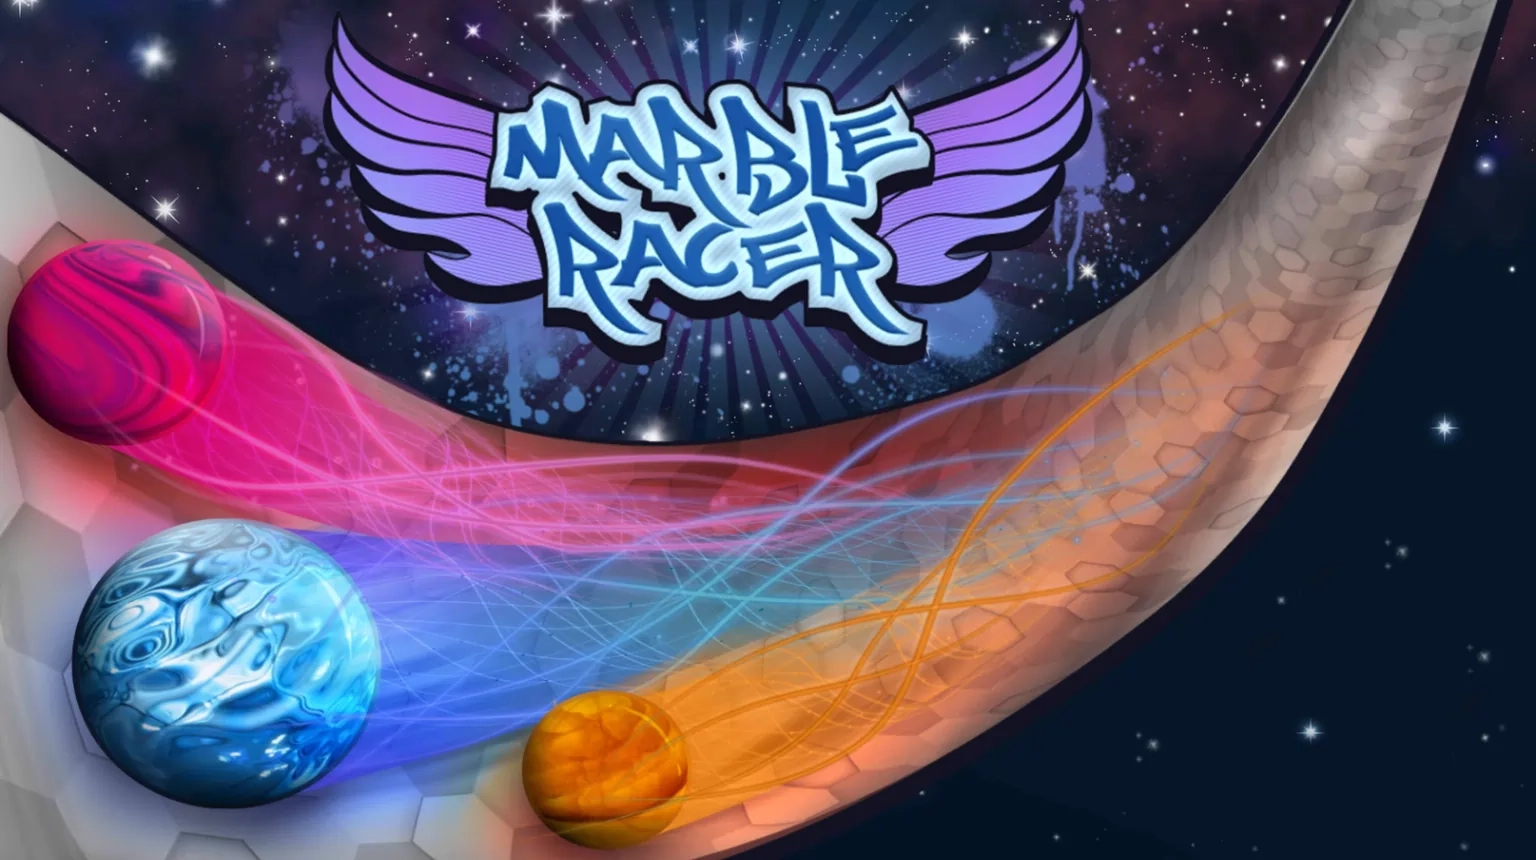 Marble Racer: Marble Racing with a Twist